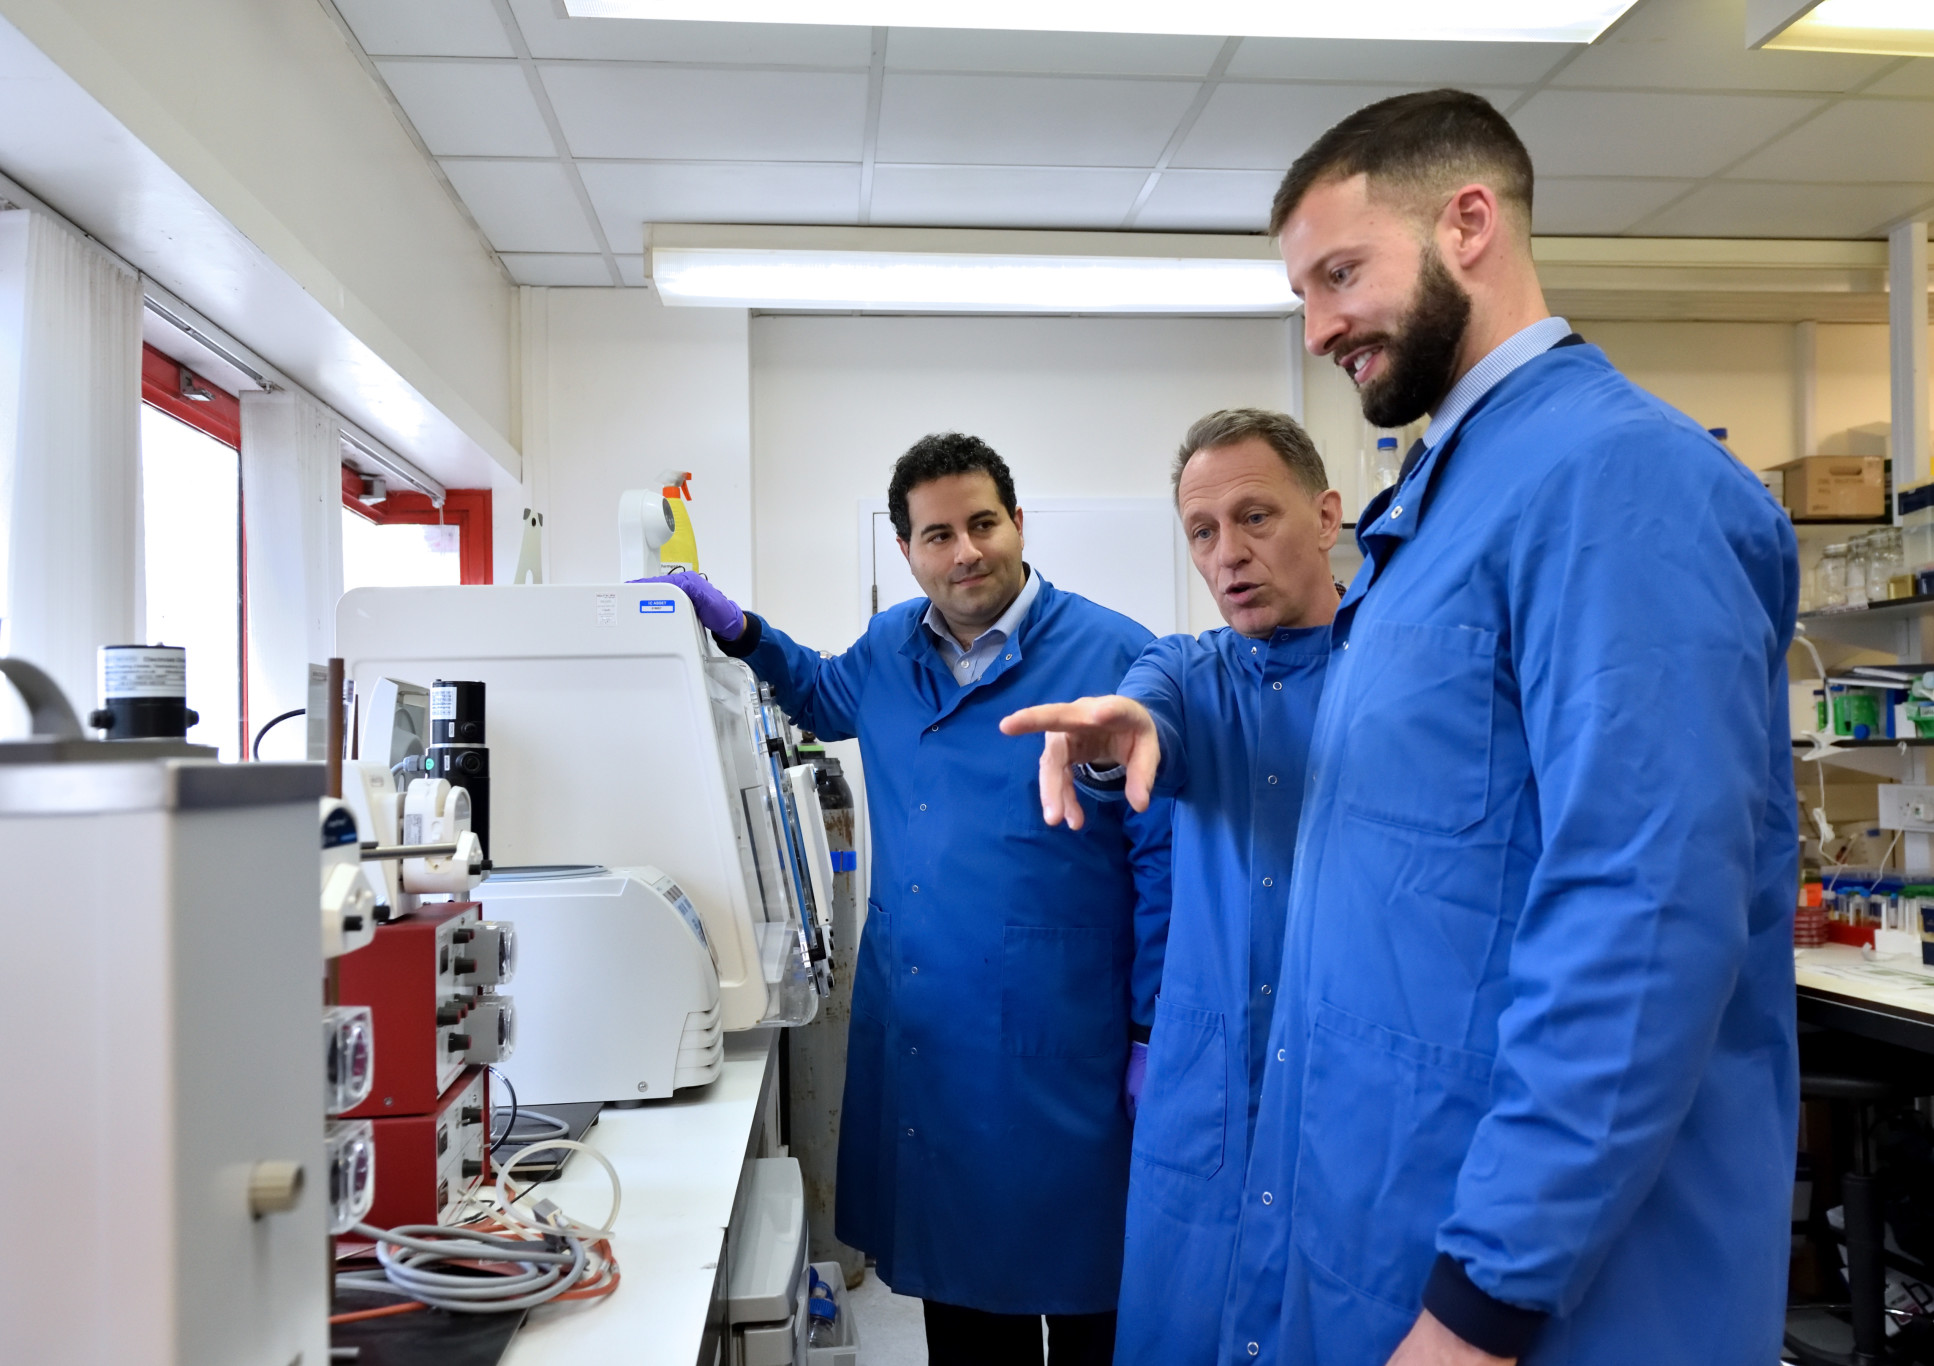 Dr Ben Mullish, Professor Julian Marchesi and Dr James McIlroy in a lab